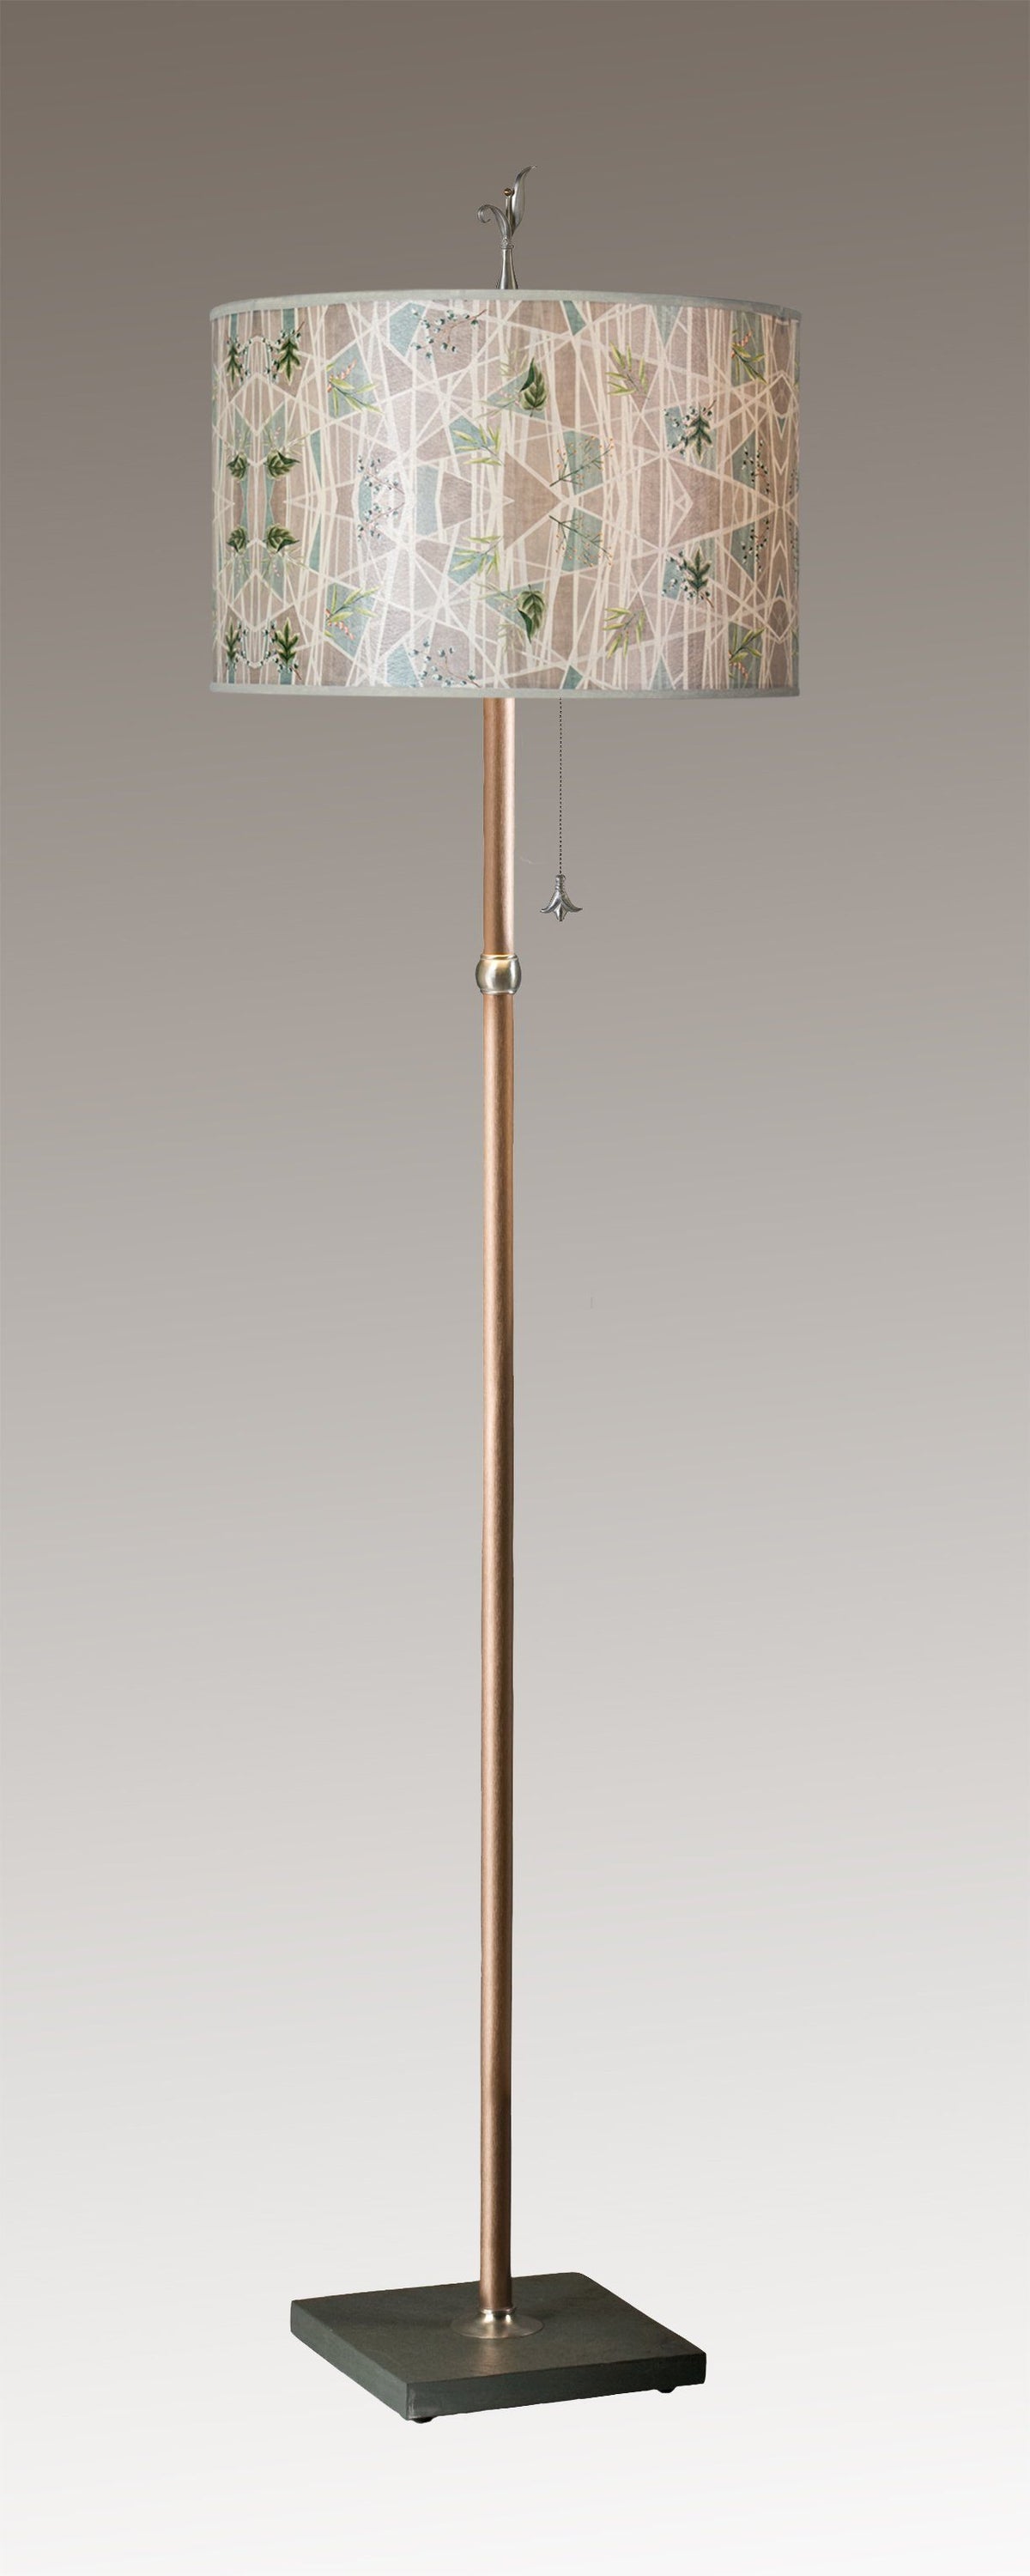 Copper Floor Lamp with Large Drum Shade in Prism